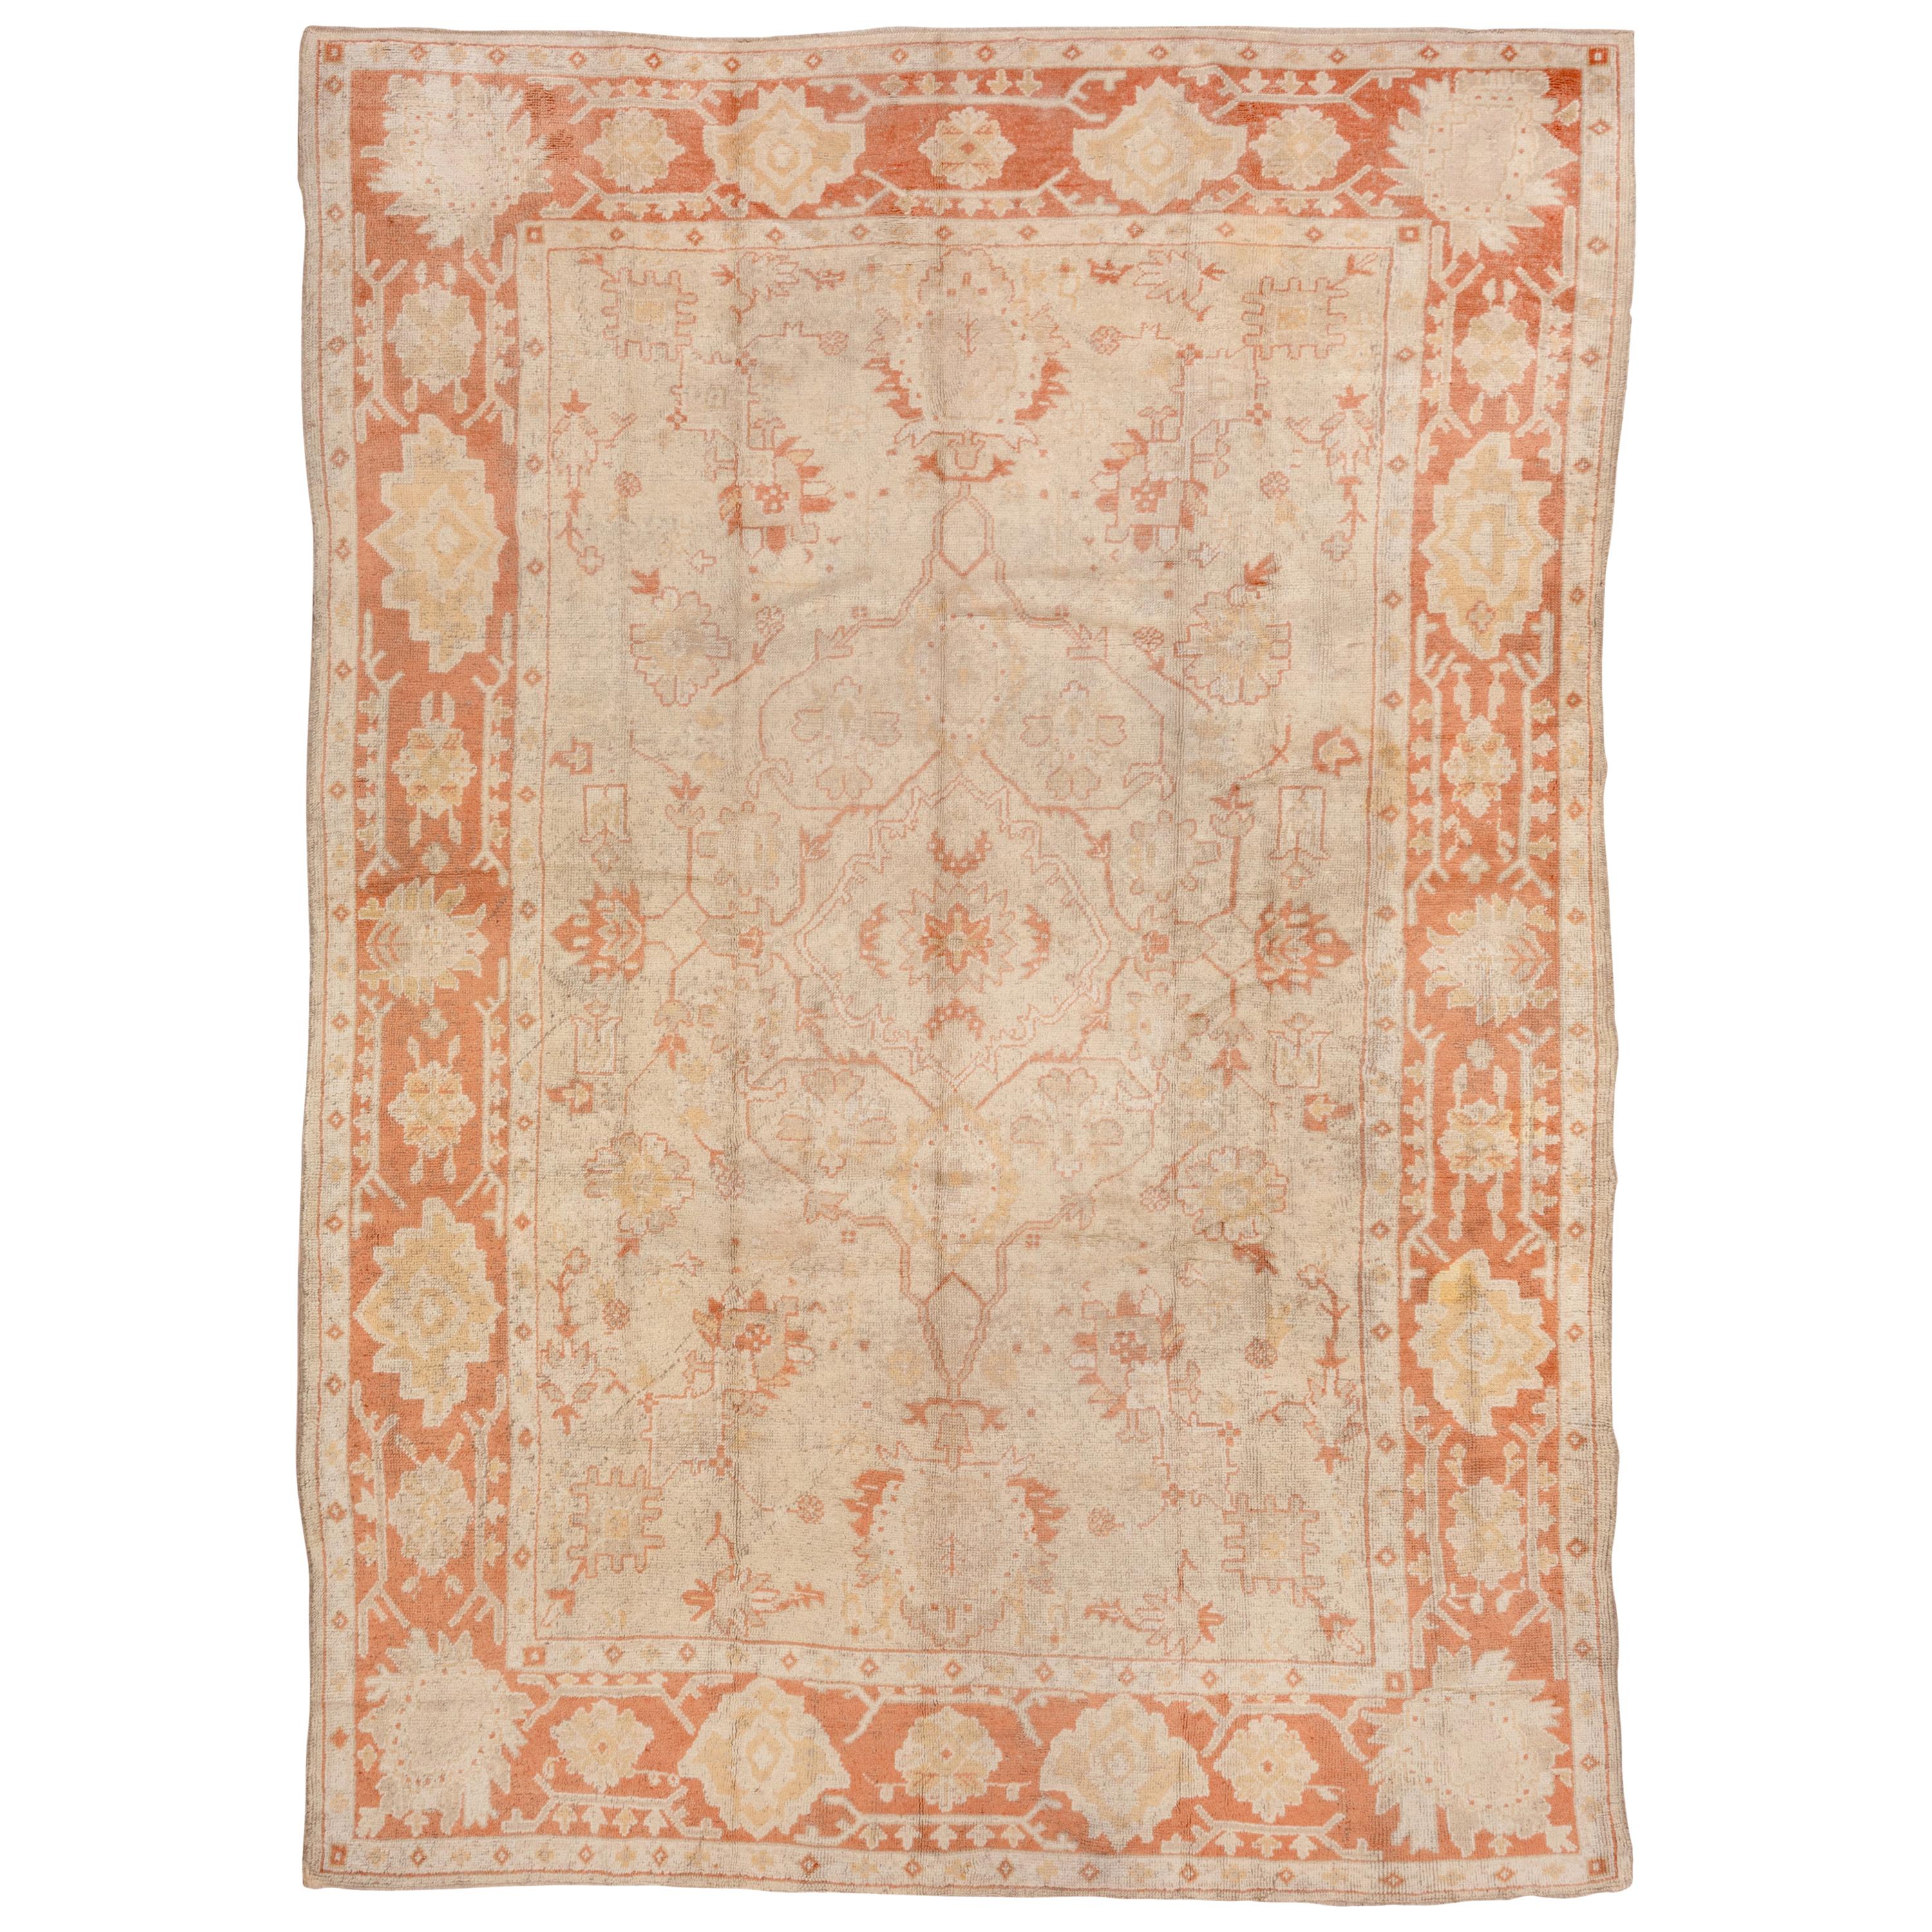 Antique Turkish Oushak Rug, Neutral Field, Orange Borders & Accents, circa 1910s For Sale